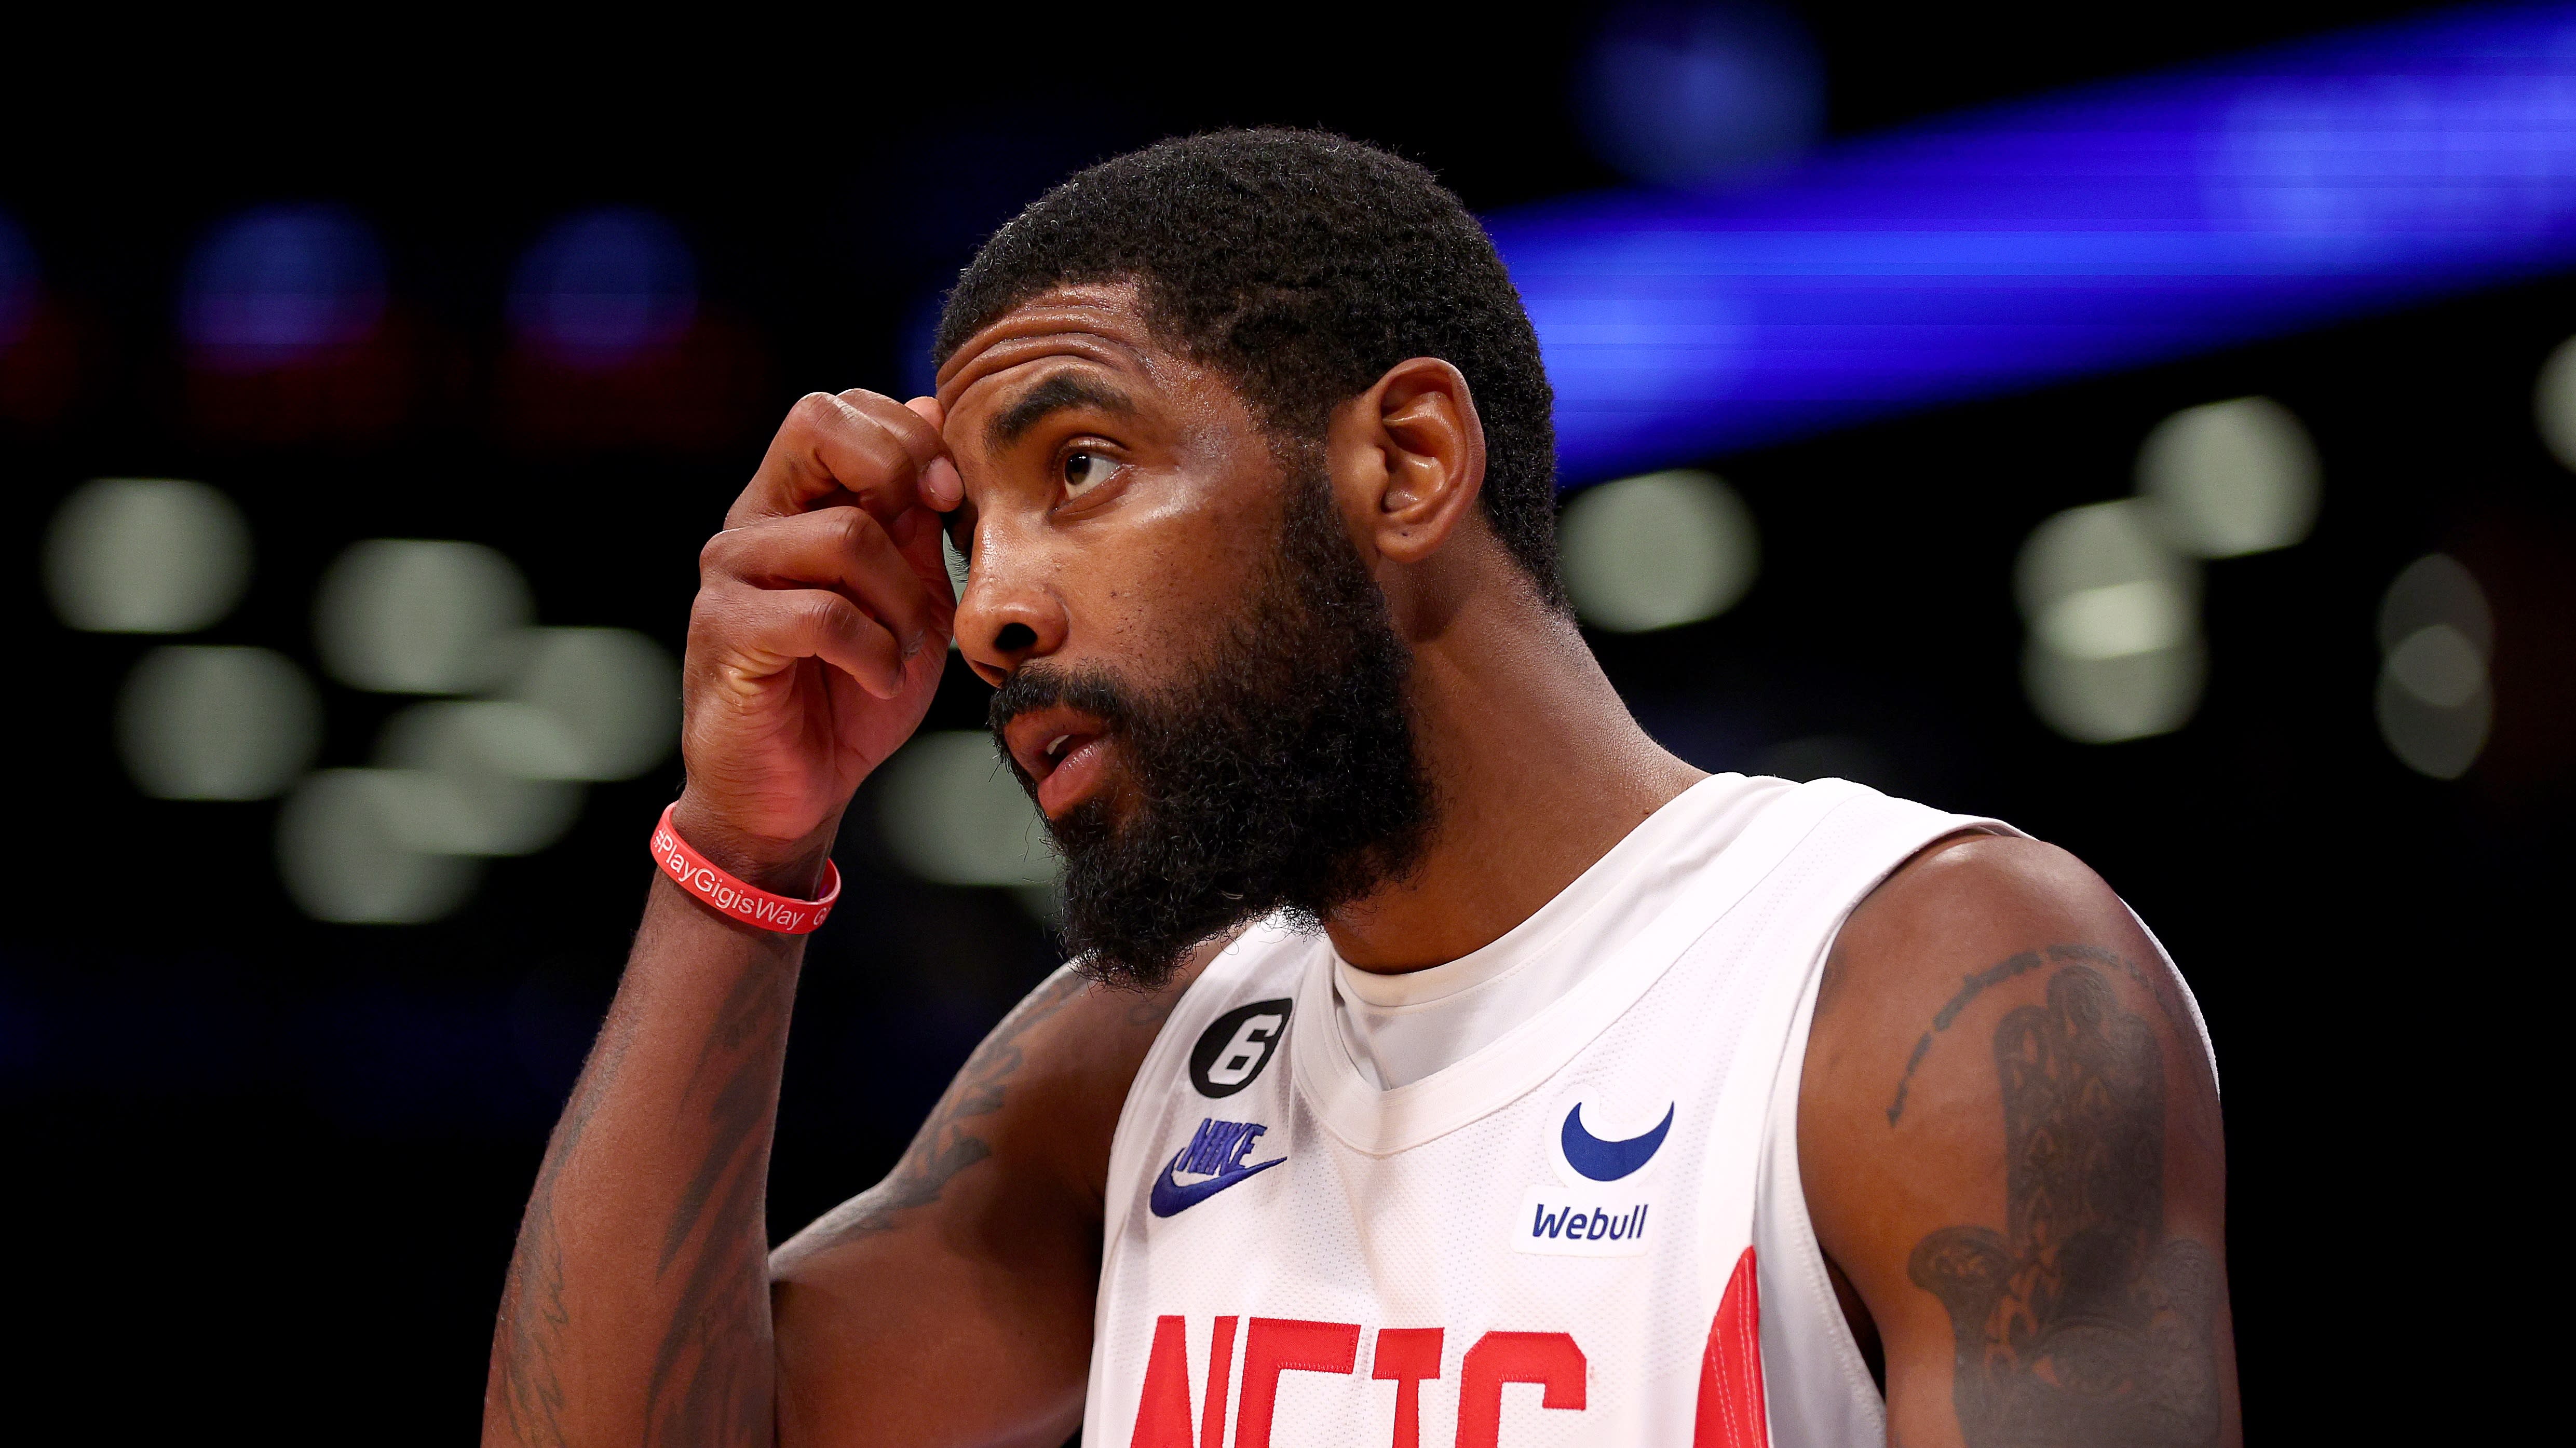 Kyrie Irving issues message to Nike after £9million deal scrapped